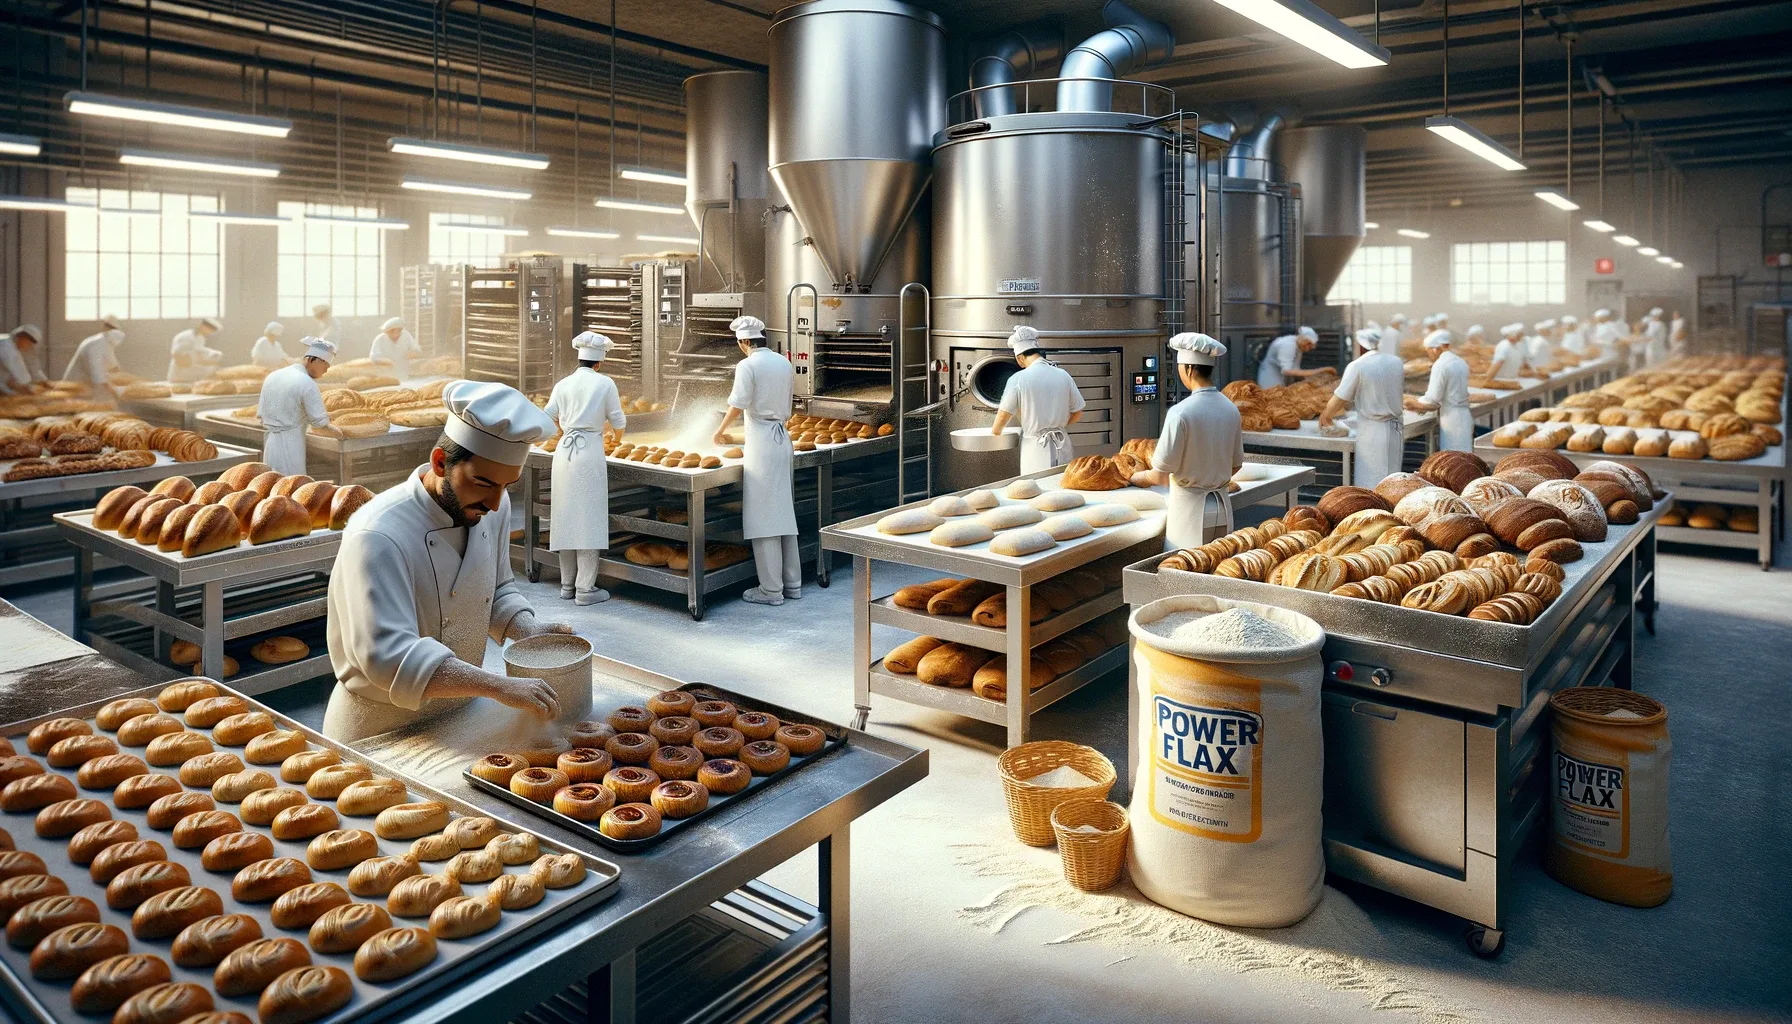 A busy production area of a commercial bakery, producing bakery items made with Keto PowerFlax Baking Mix.